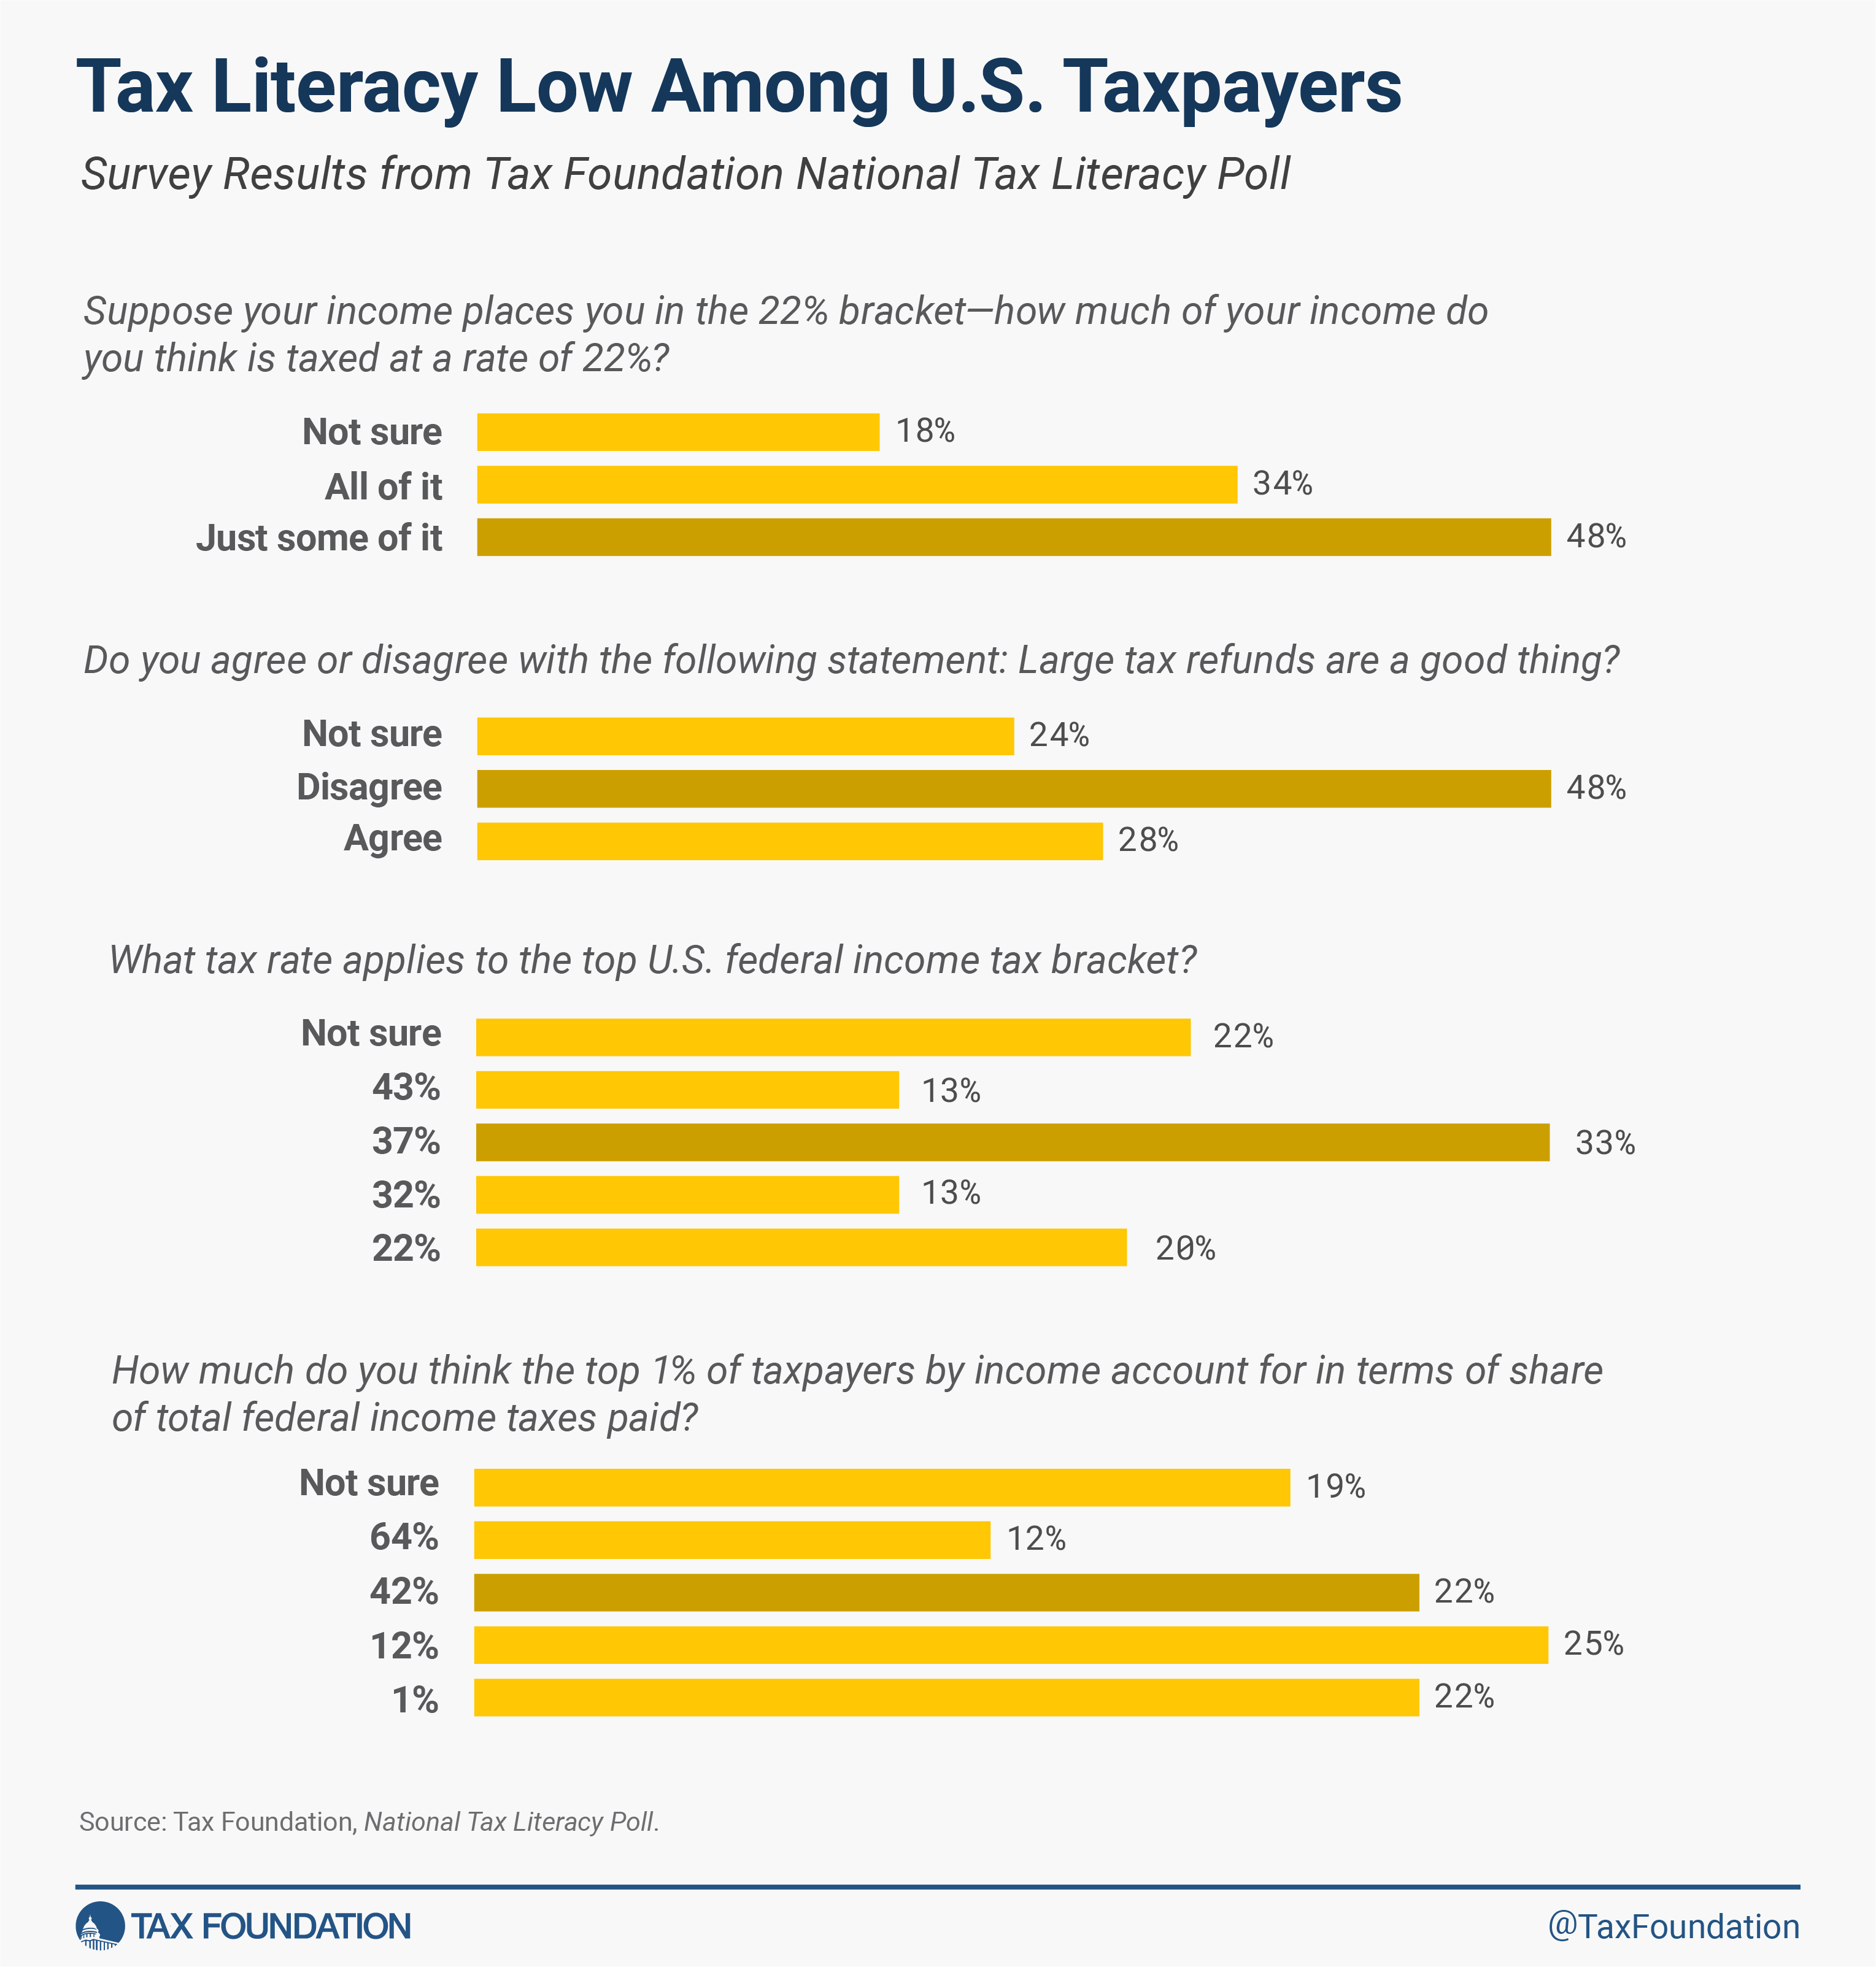 Tax Literacy Low Among US Taxpayers, according to new Tax Foundation National Literacy Poll